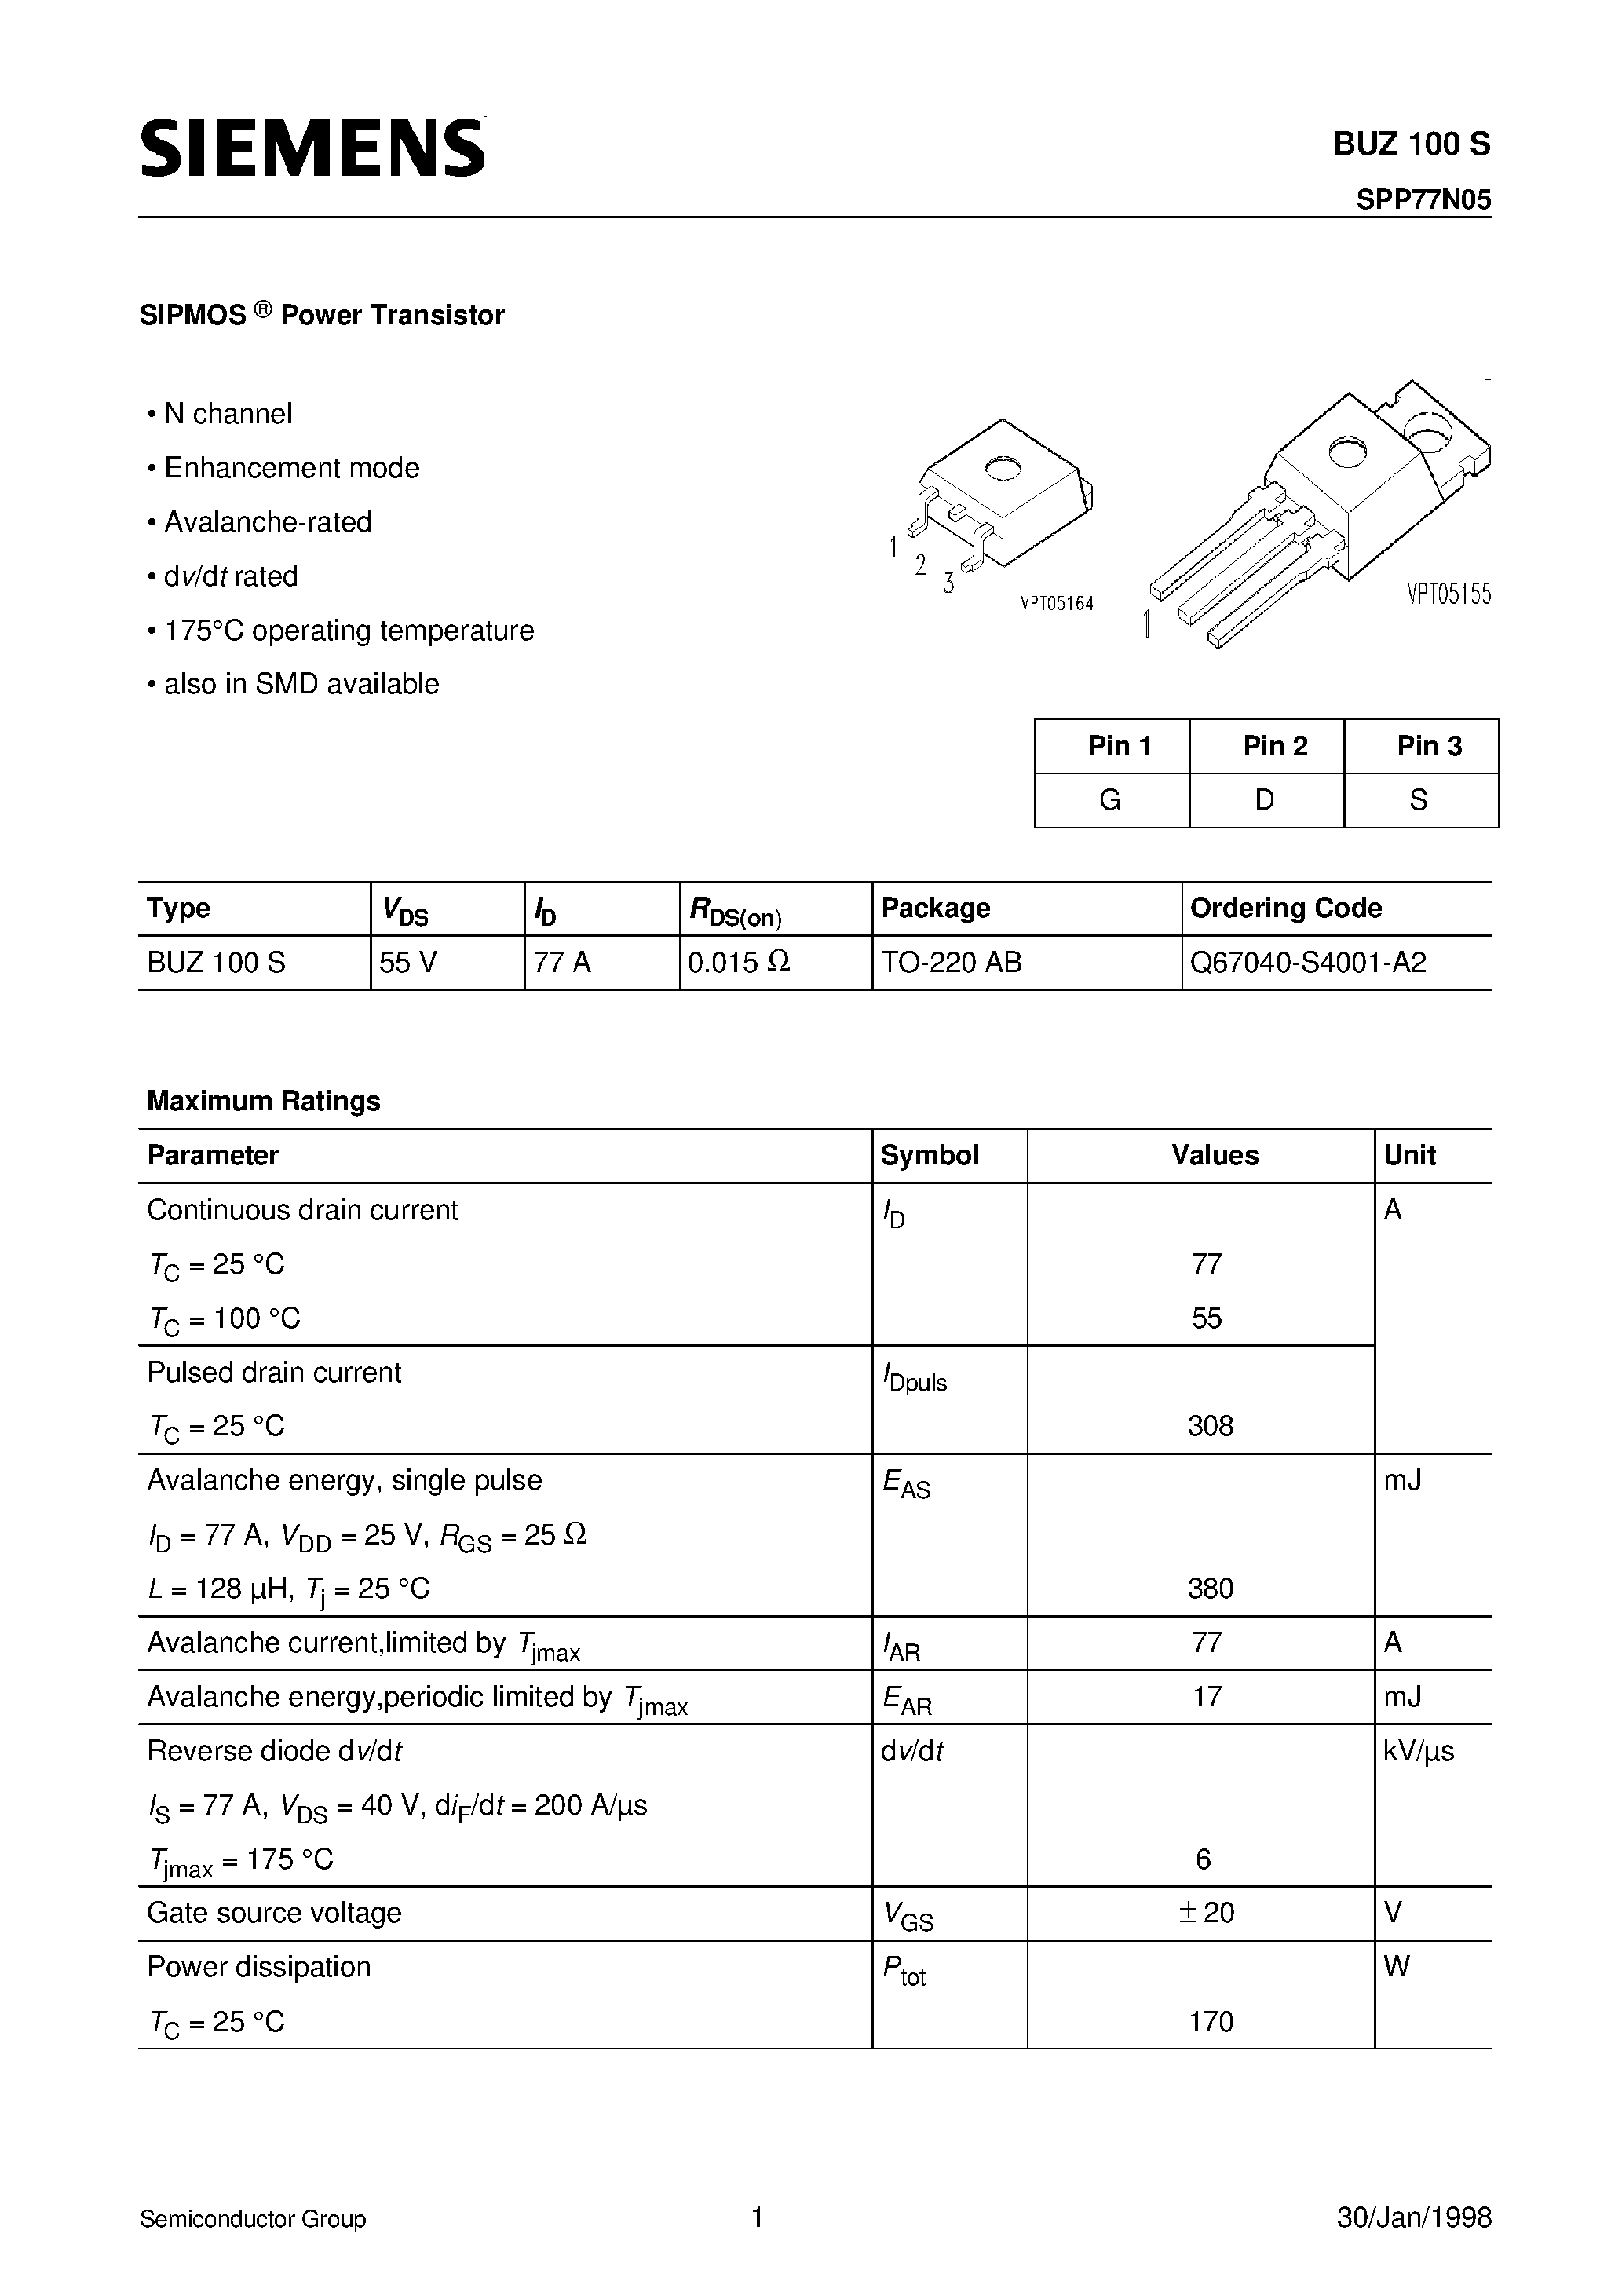 Datasheet BUZ100S - SIPMOS Power Transistor (N channel Enhancement mode Avalanche-rated dv/dt rated) page 1